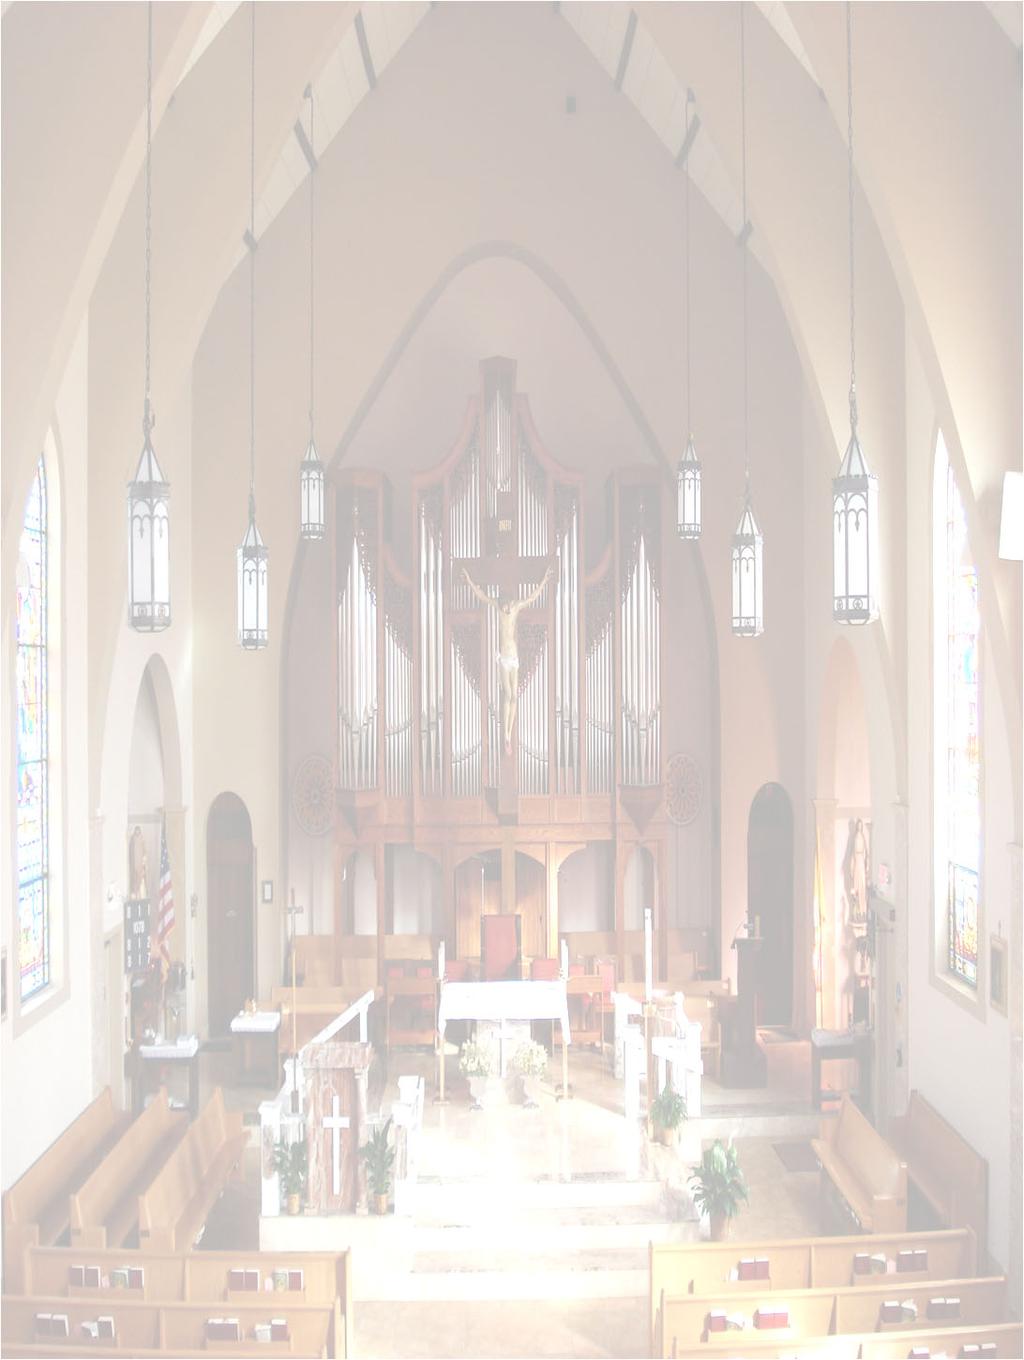 , Apr 27 Fri., Apr 28 - St. Peter Chanel; St. Louis Grignion de Montfort 8:00 p.m. AA (Spanish) - Geenen Hall Sat., Apr 29 - St. Catherine of Siena 9:00 a.m. Confession - Fr. Fausto 9:30 a.m. Legion of Mary - Geenen Hall 3:00 p.